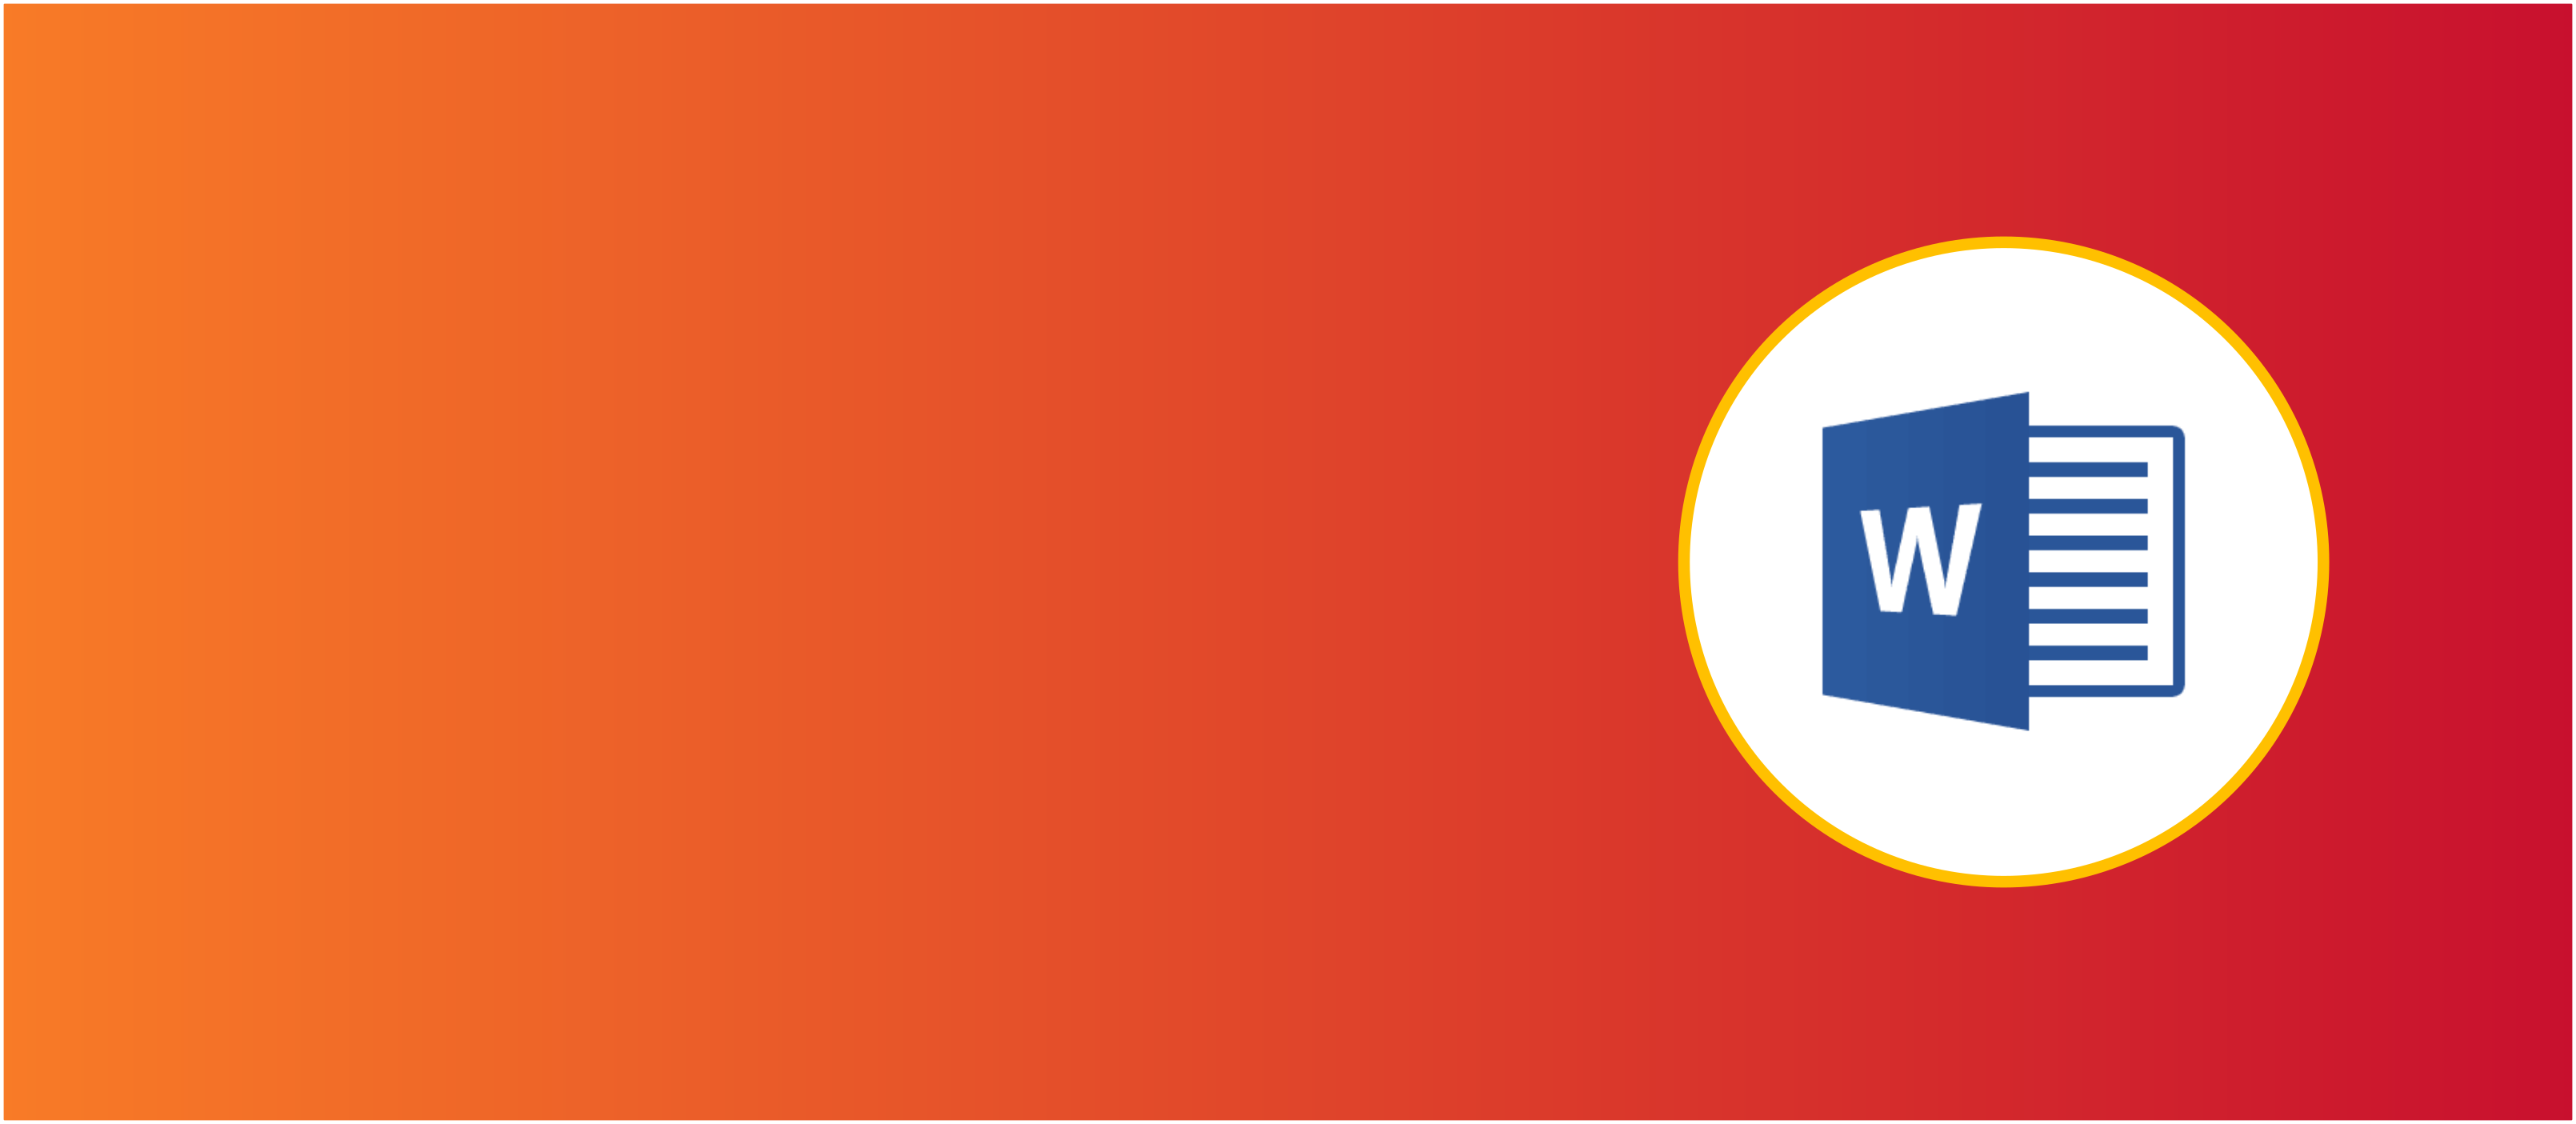 Microsoft Word icon on a background of orange-to-red gradient